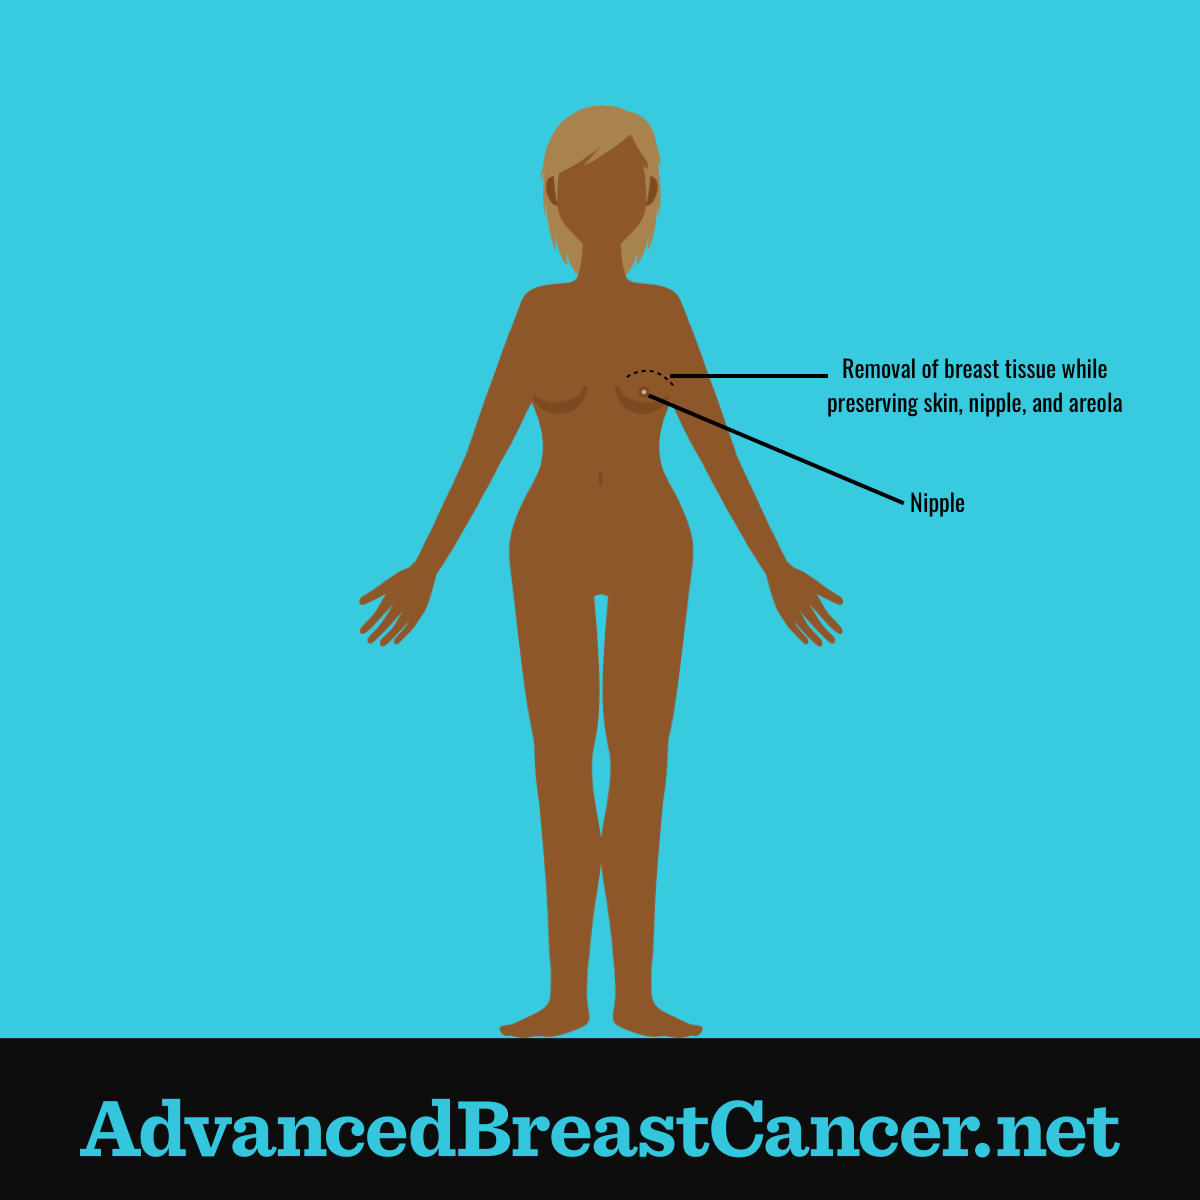 Human figure showing the right breast tissue has been removed but the nipple, areola and breast skin have been preserved.